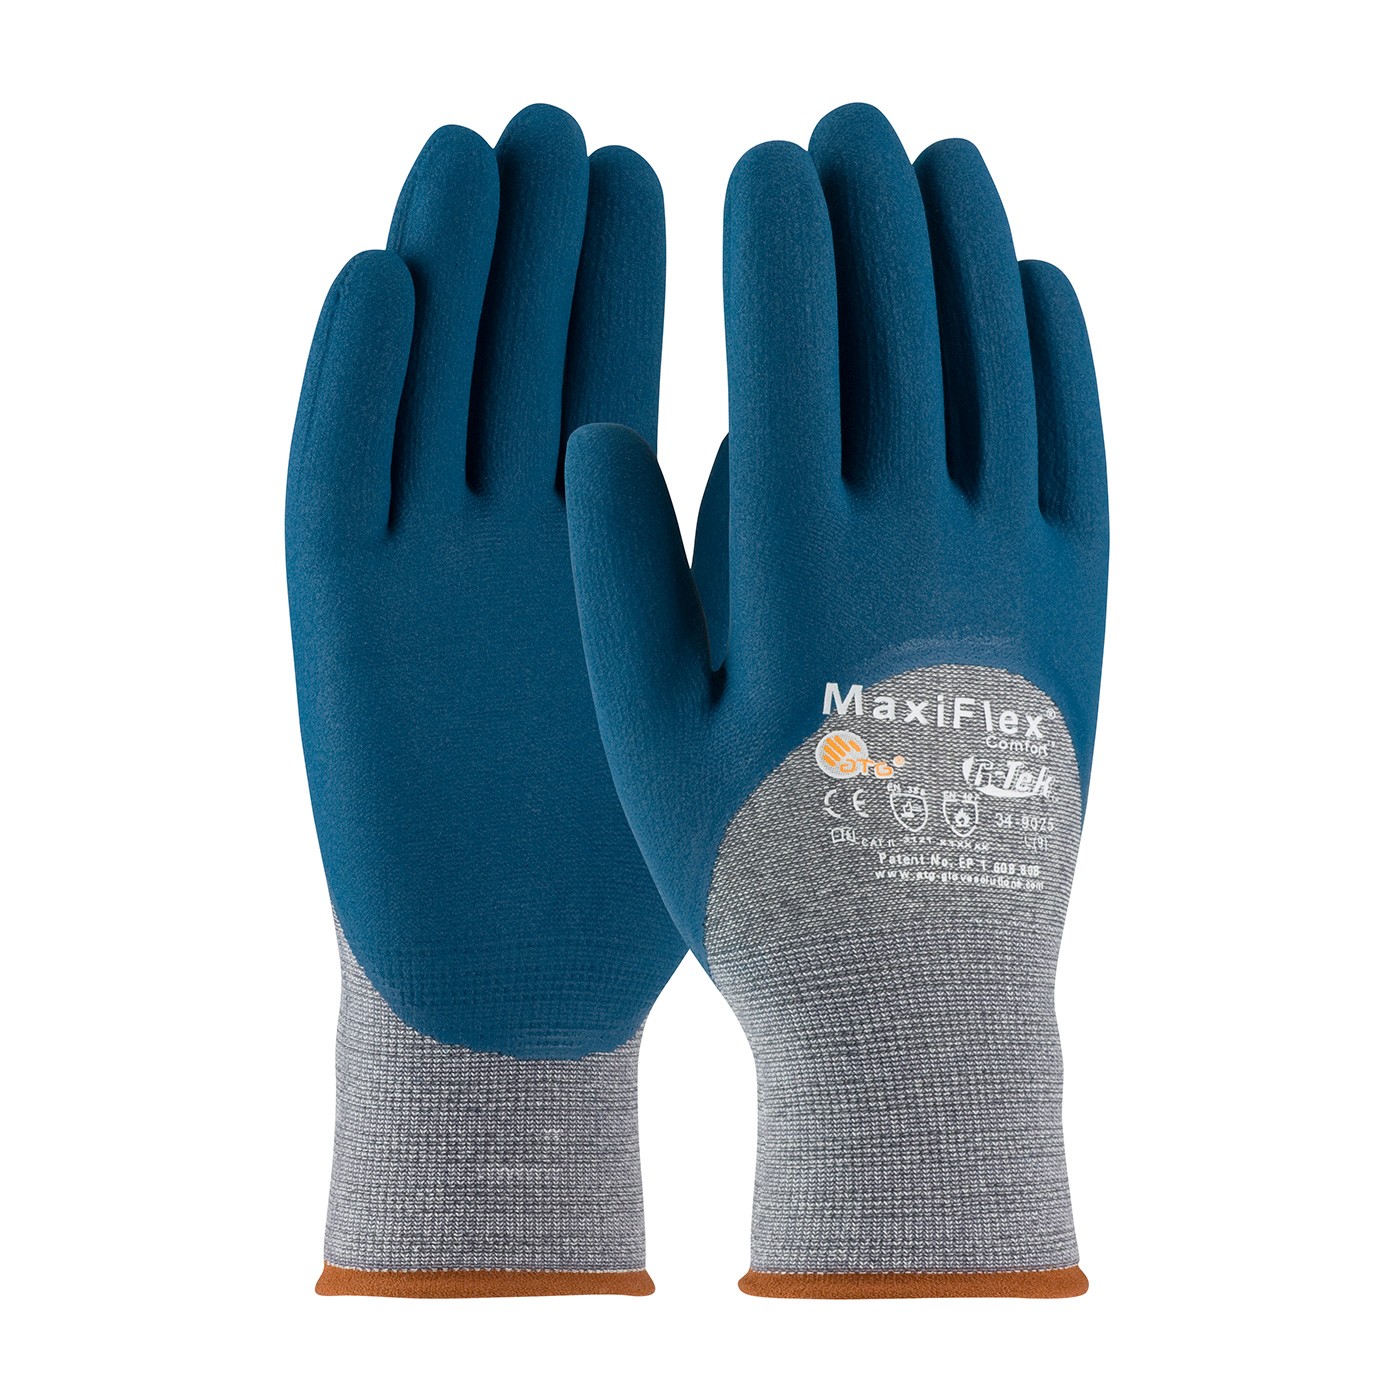 MaxiFlex® Comfort™ Seamless Knit Cotton / Nylon / Lycra Glove with Nitrile Coated MicroFoam Grip on Palm, Fingers & Knuckles (#34-9025)